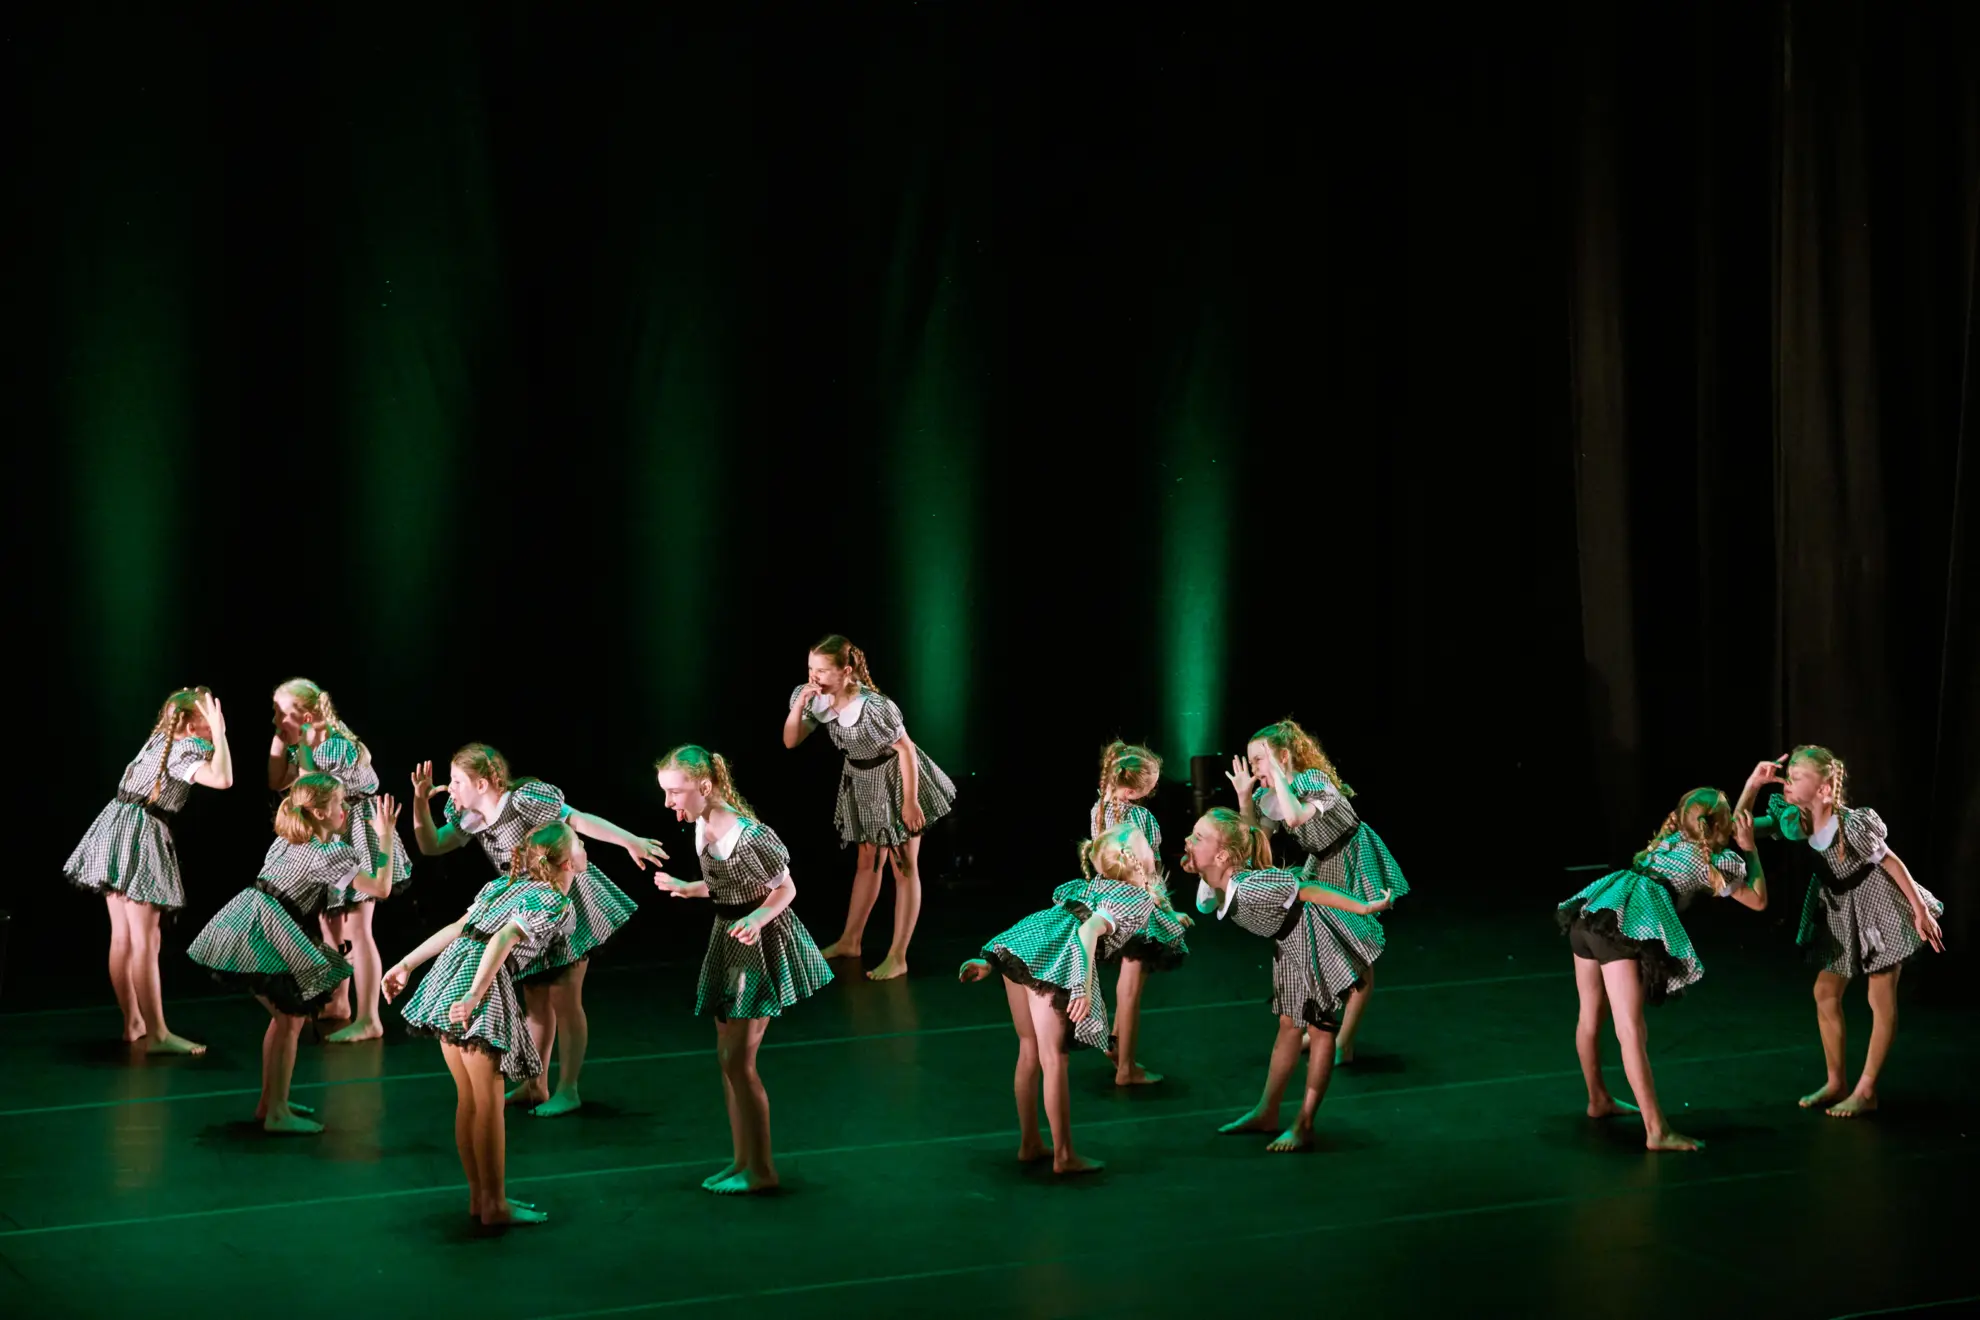 young girls on stage performing making faces at each other